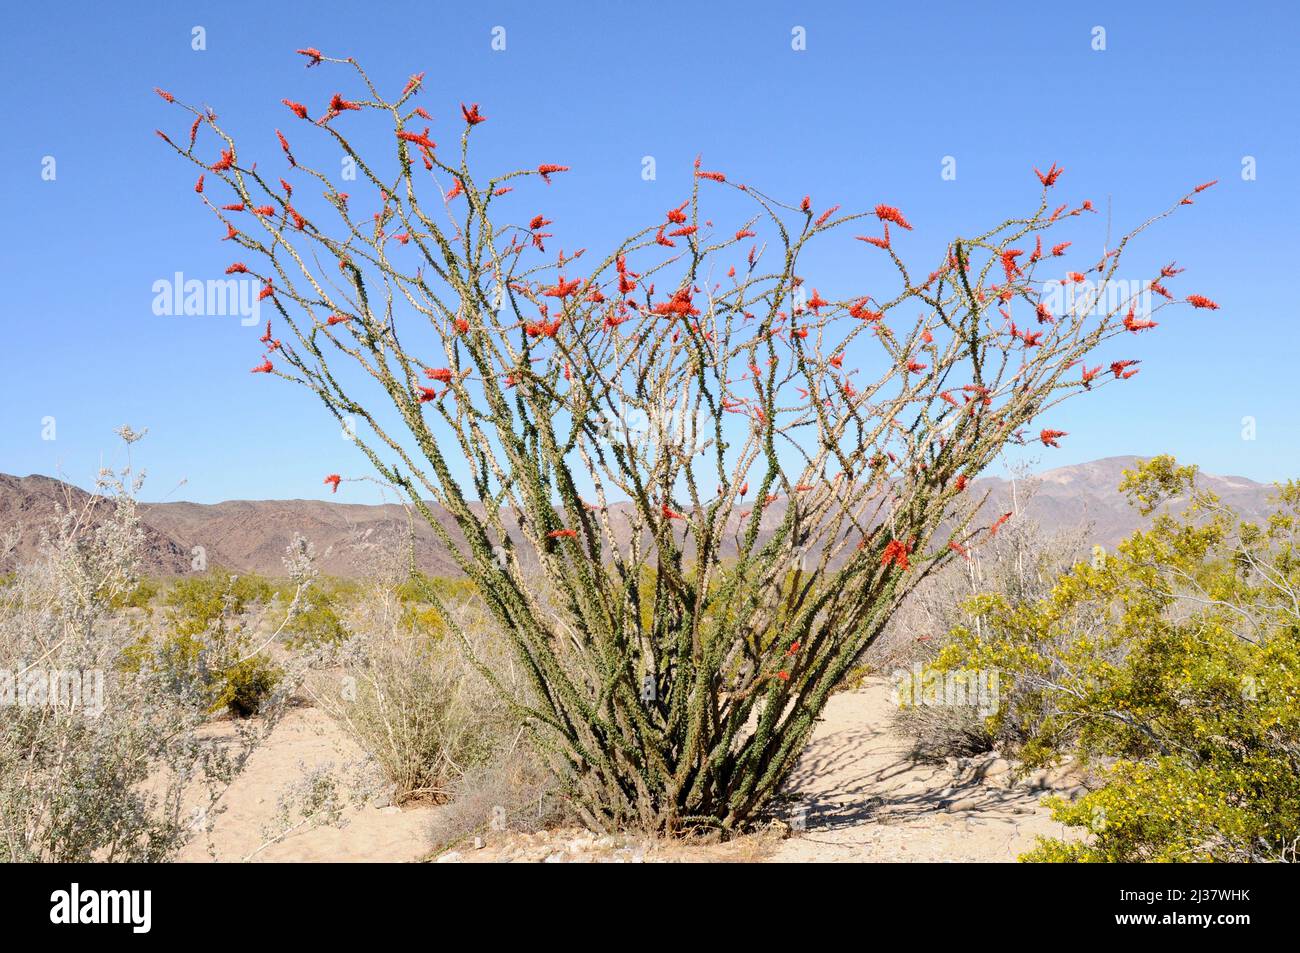 Ocotillo or coachwhip (Fouquieria splendens) is a spiny shrub native to deserts of southwestern USA and northern Mexico. This photo was taken in Stock Photo